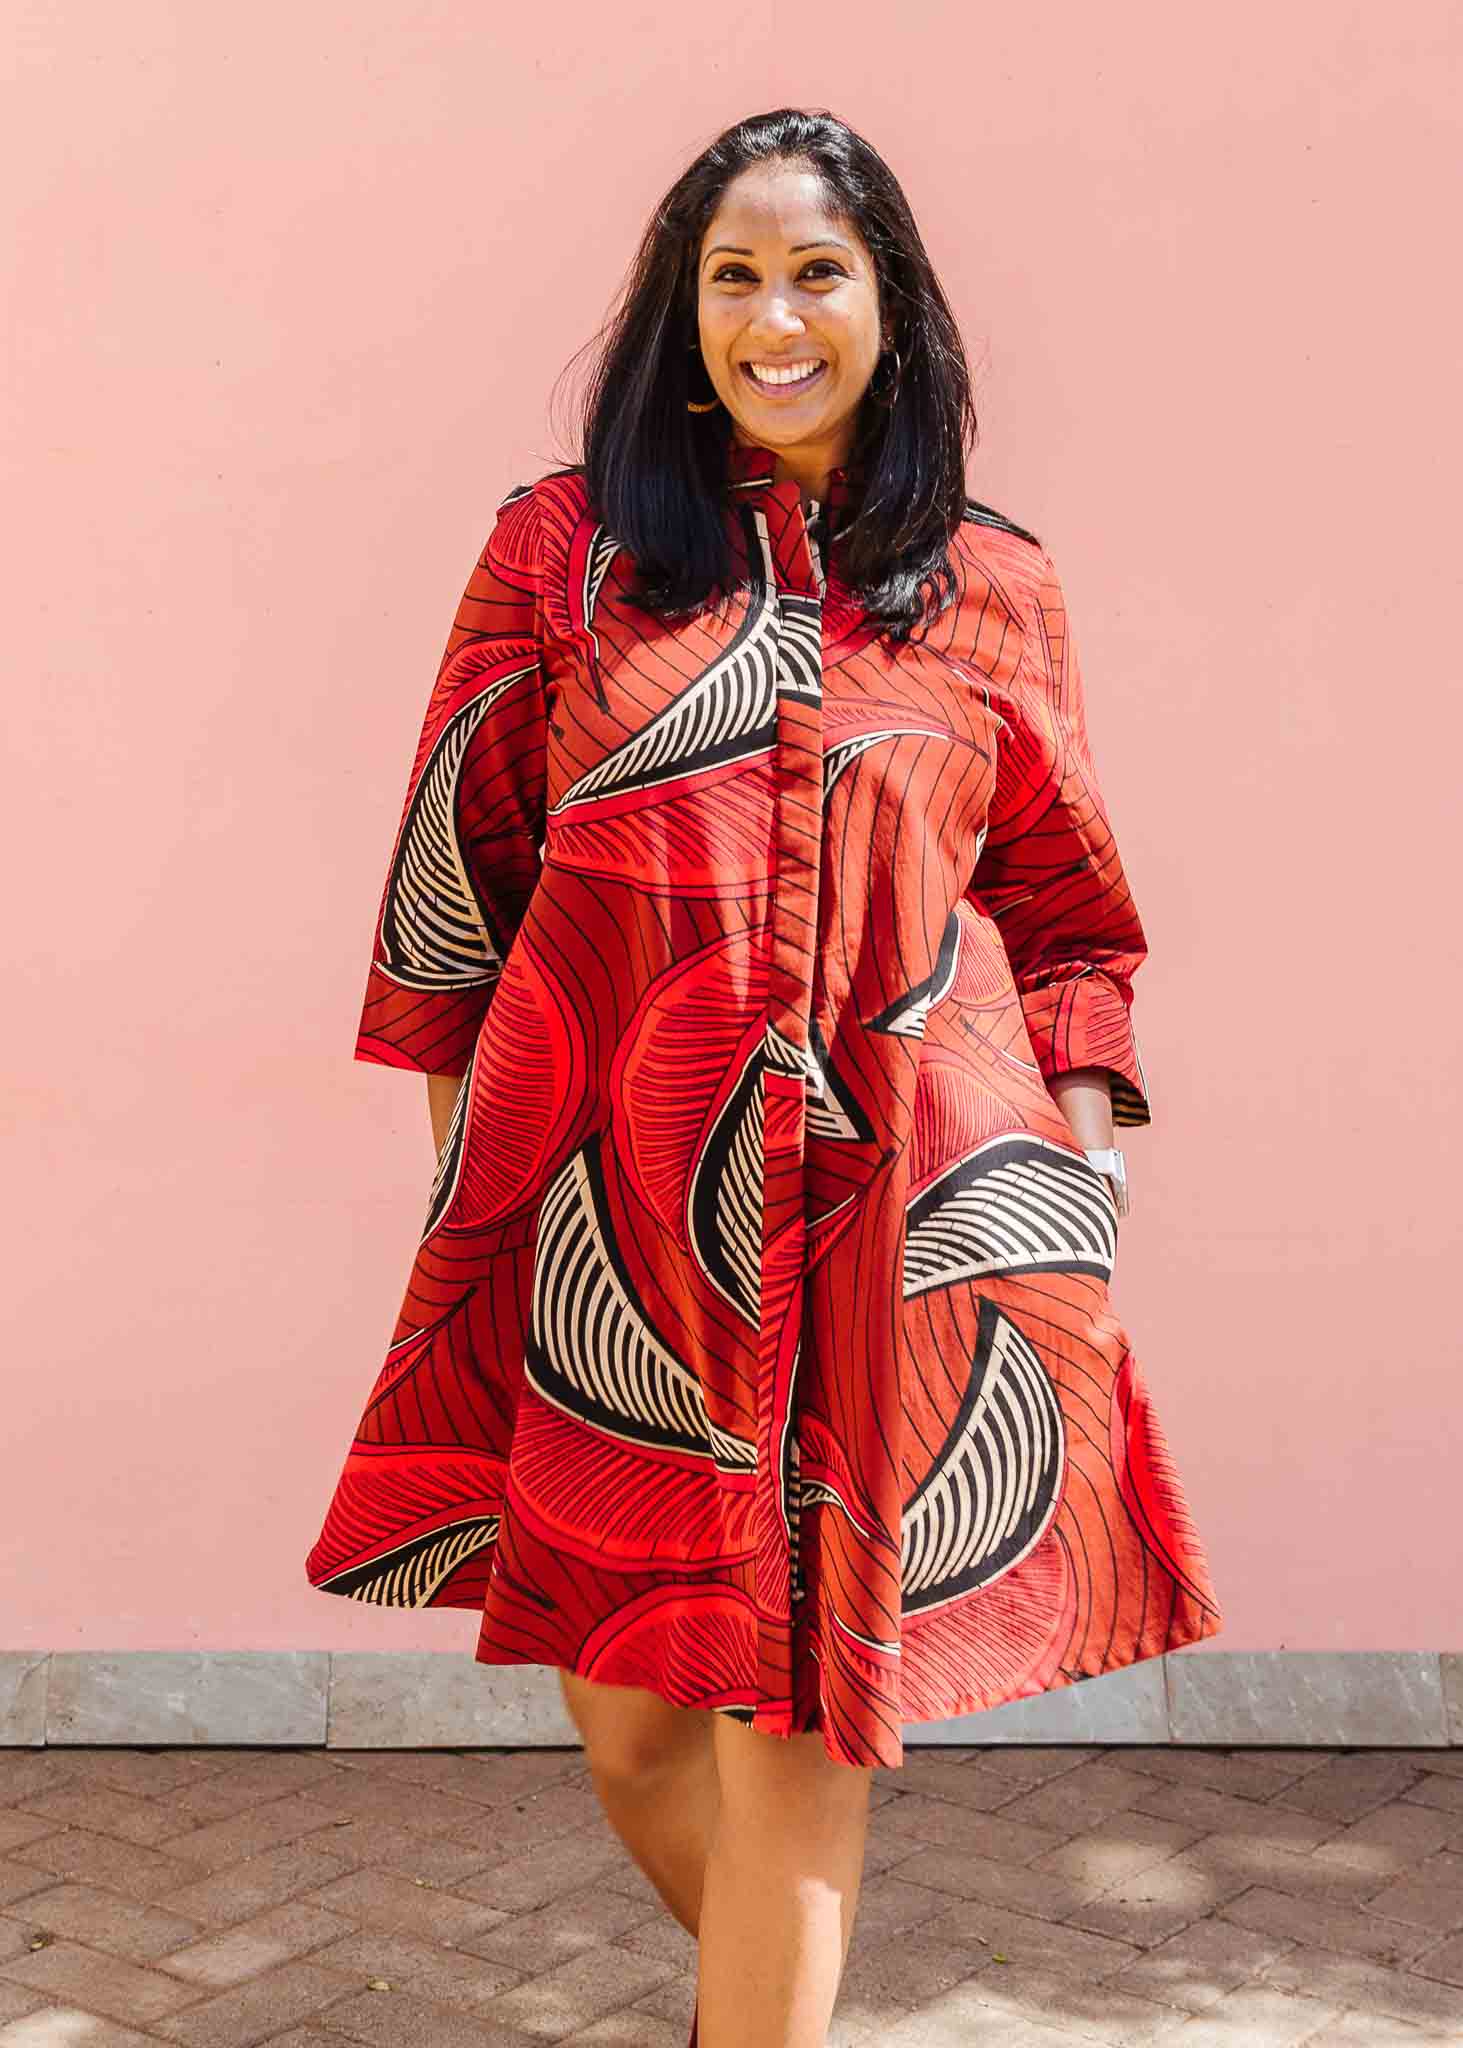 Model wearing red shaded, large feather print dress.